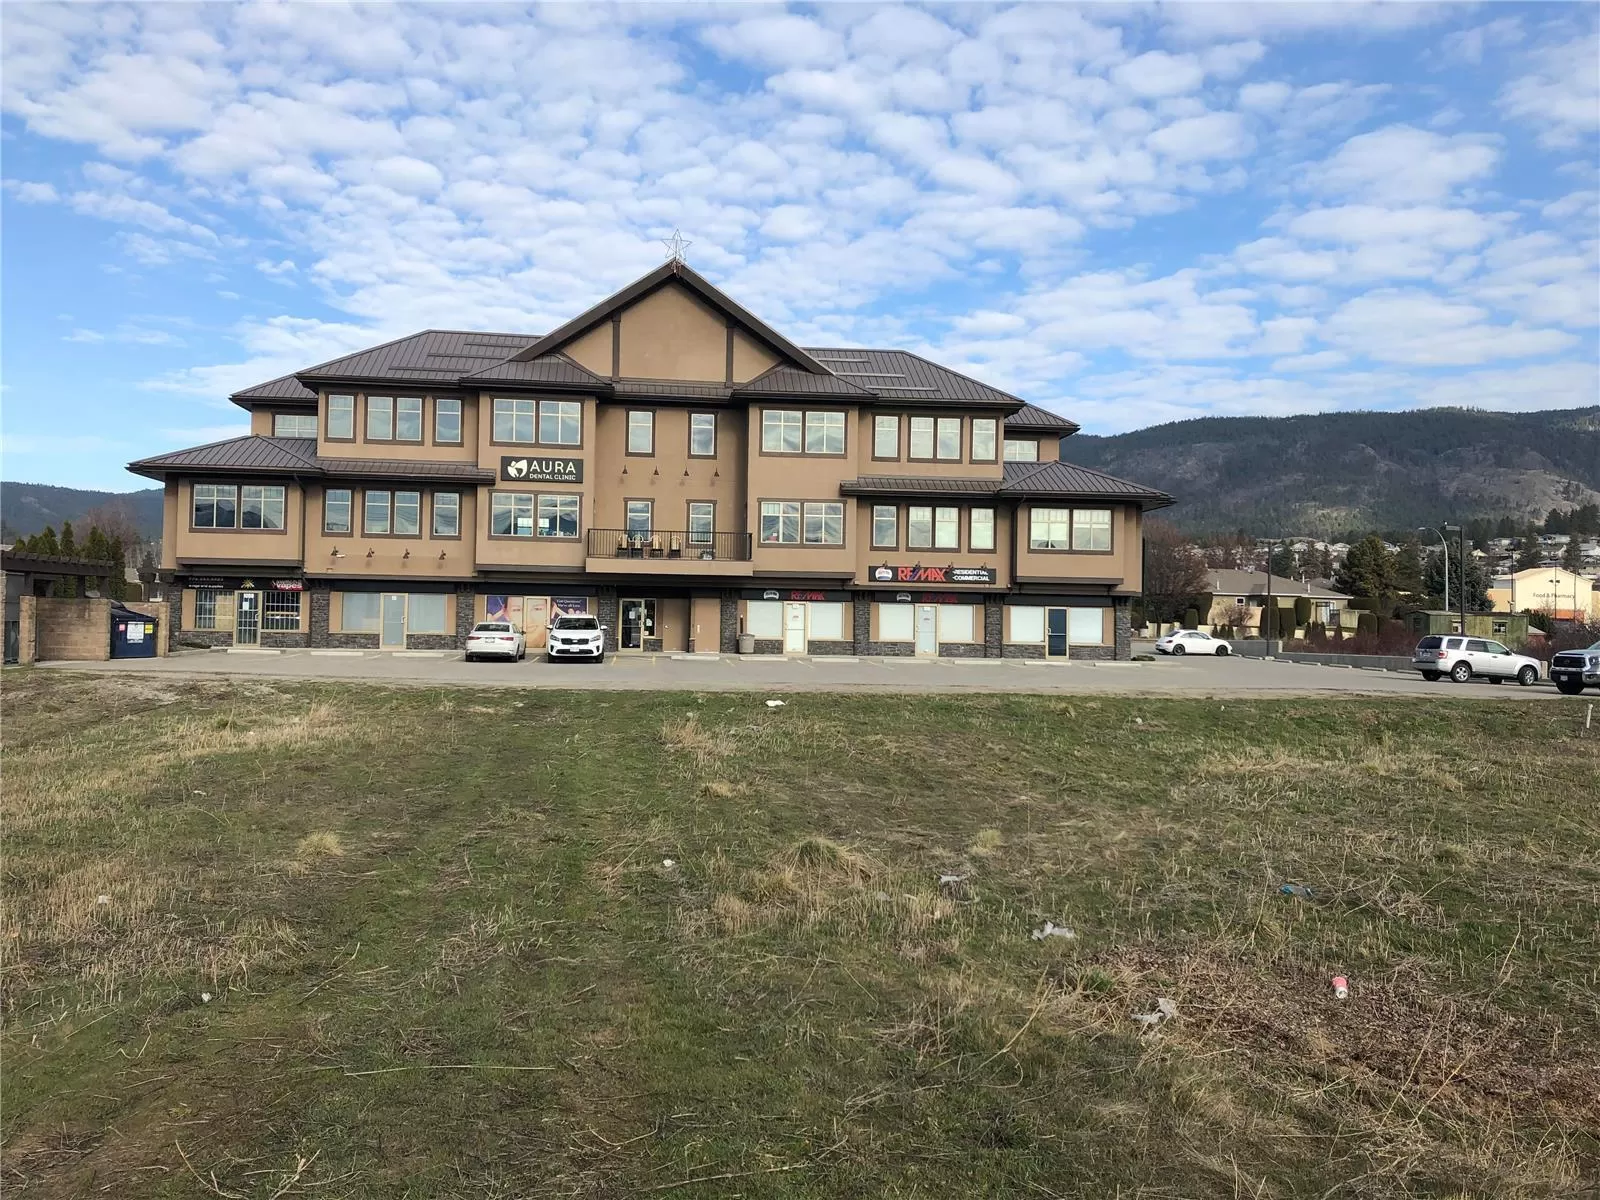 Residential Commercial Mix for rent: 2205 Louie Drive Unit# 208, Westbank, British Columbia V4T 2L3